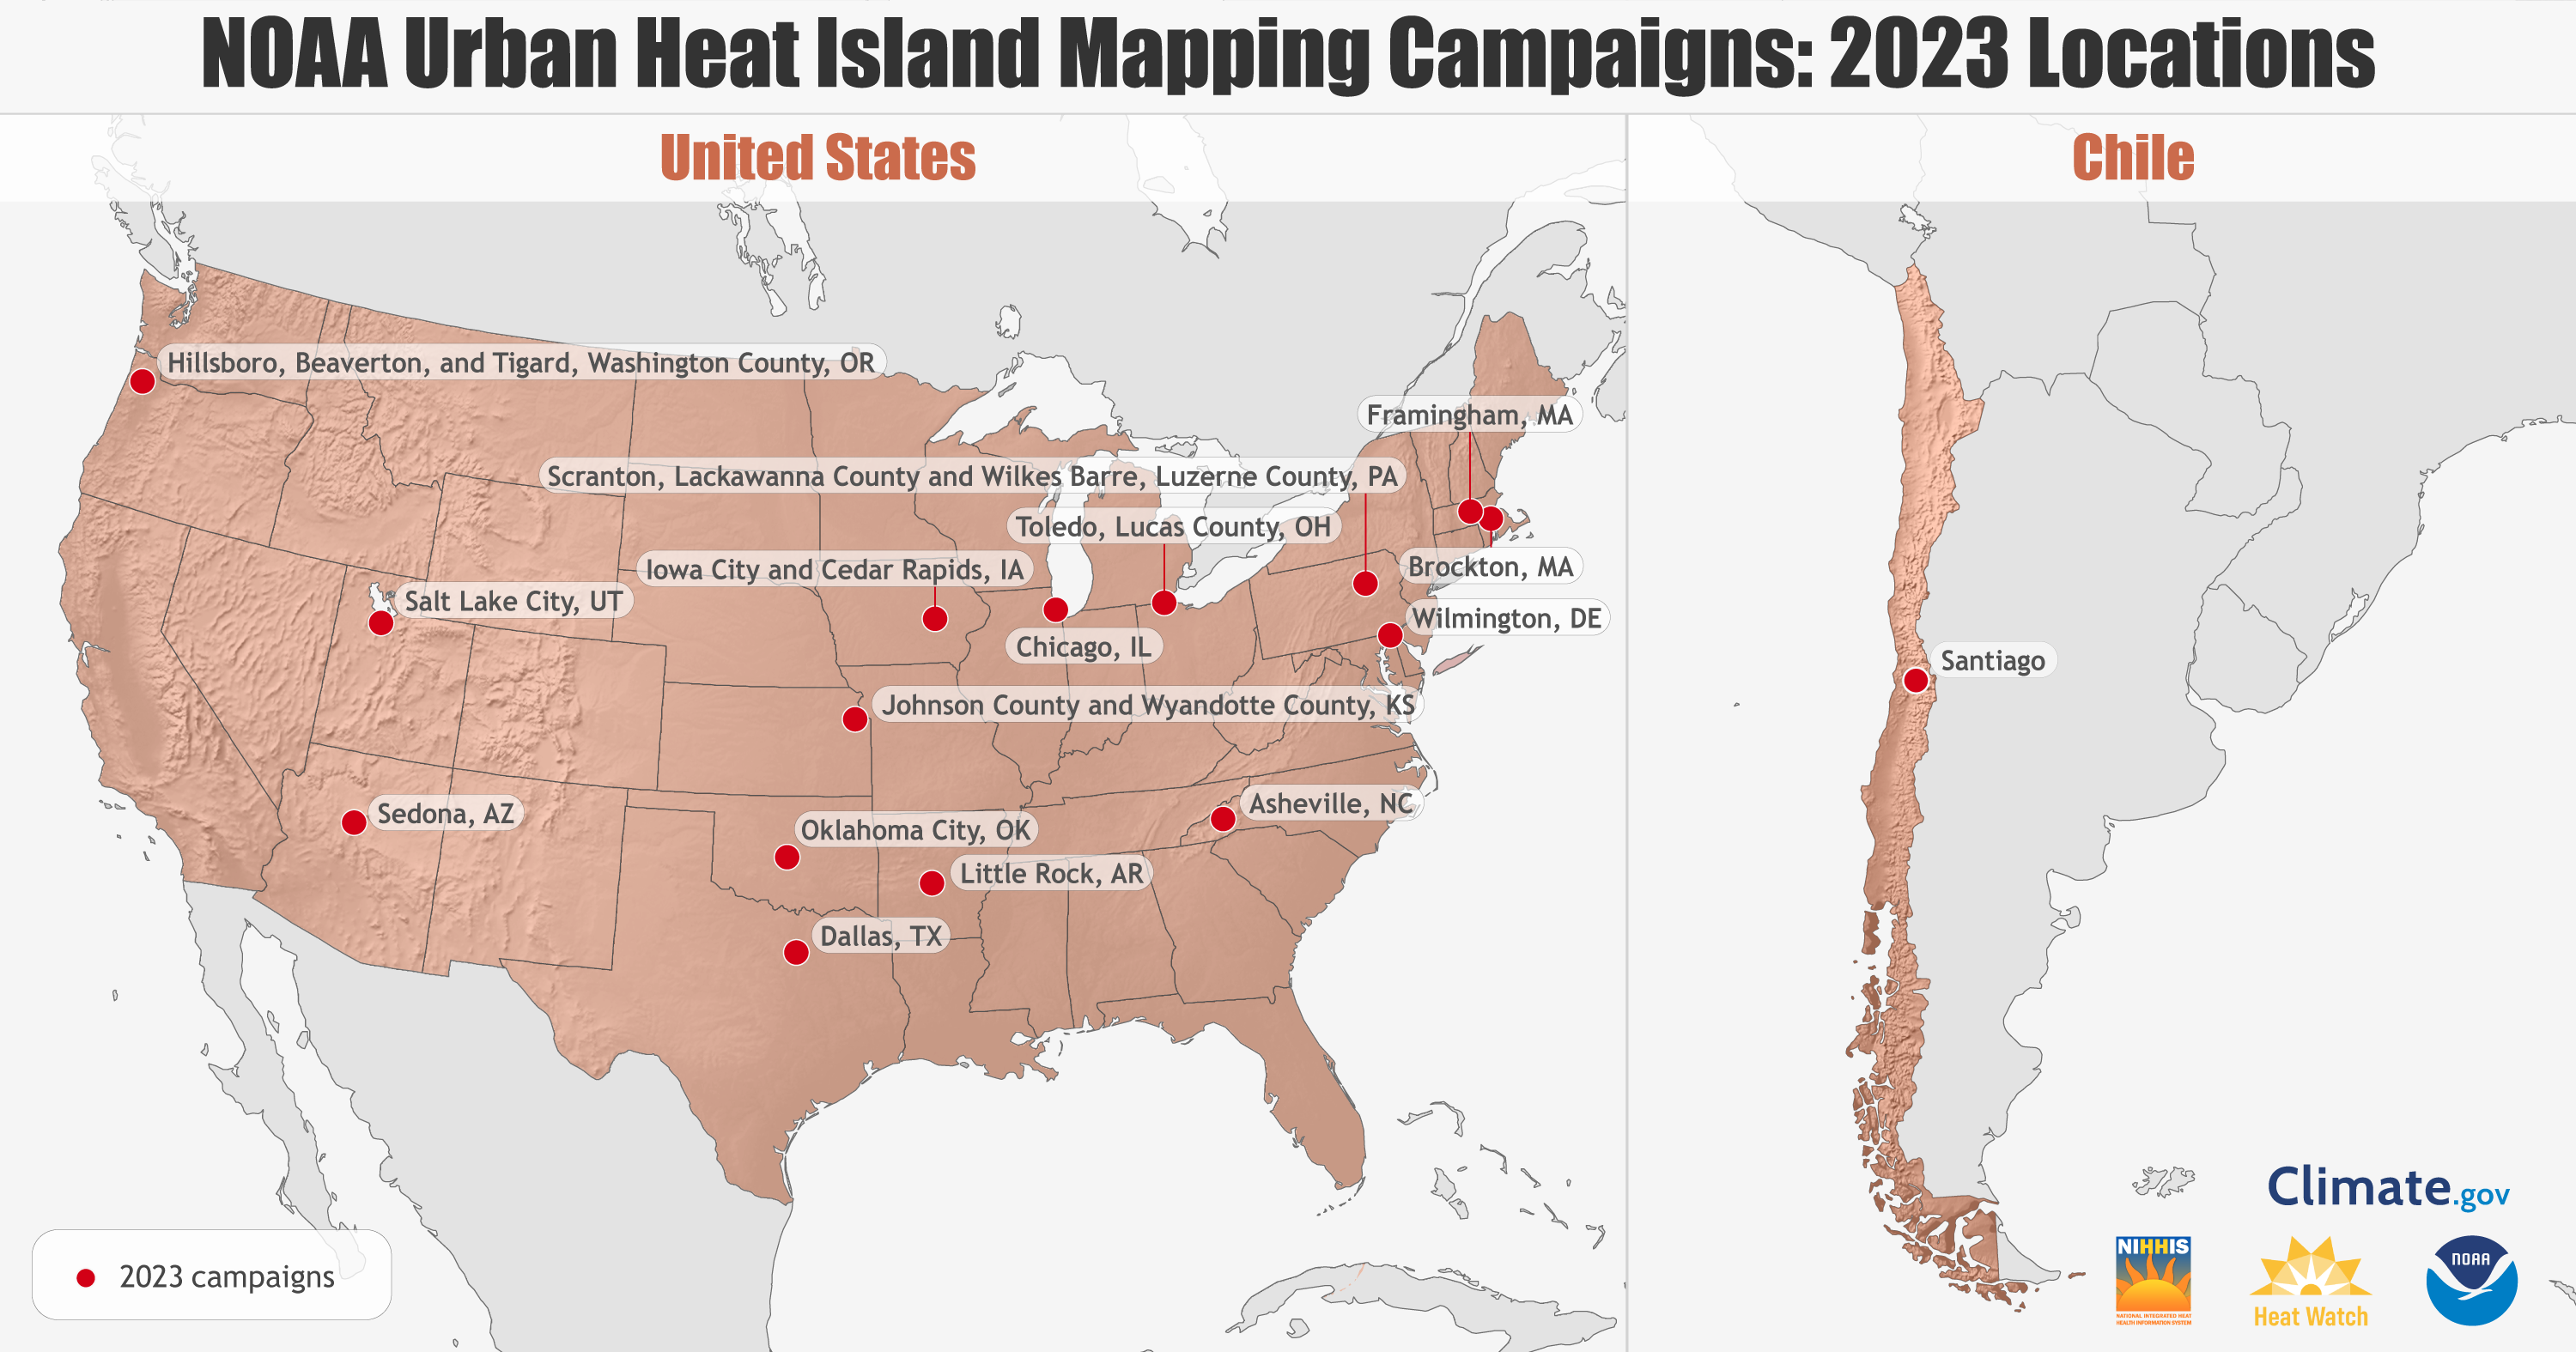 Map showing urban heat islands in multiple cities and counties in 14 states this summer and in one international city, Santiago, Chile. Since 2017, NOAA and its science partner, CAPA Strategies, have worked with more than 70 communities to create heat island maps that can be used to inform cooling strategies.